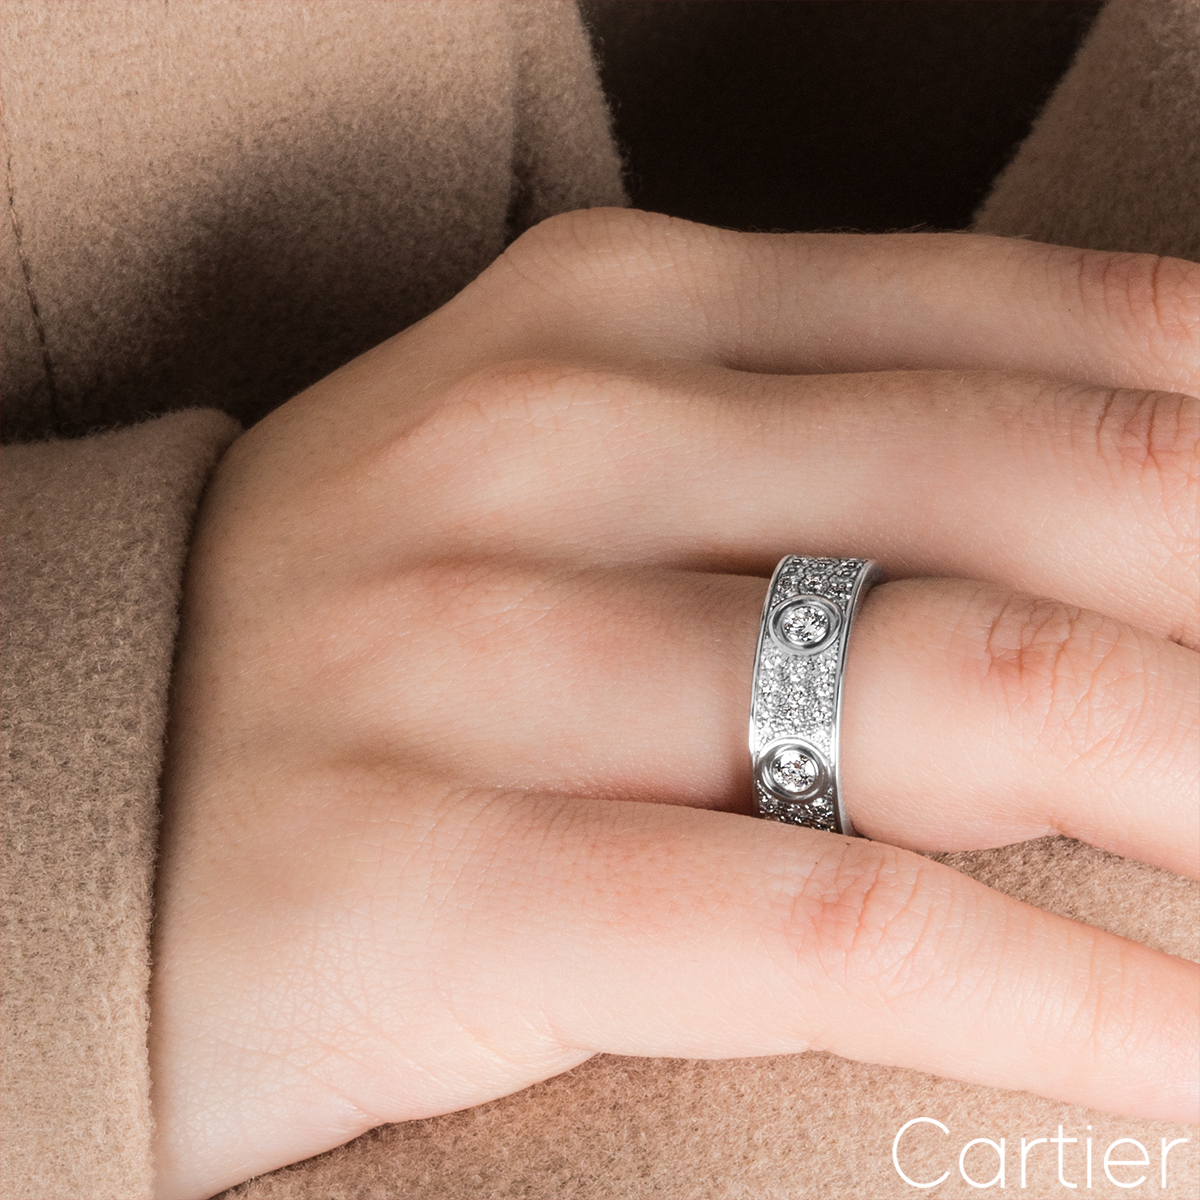 Cartier White Gold Pave Diamond Love Ring N4210400